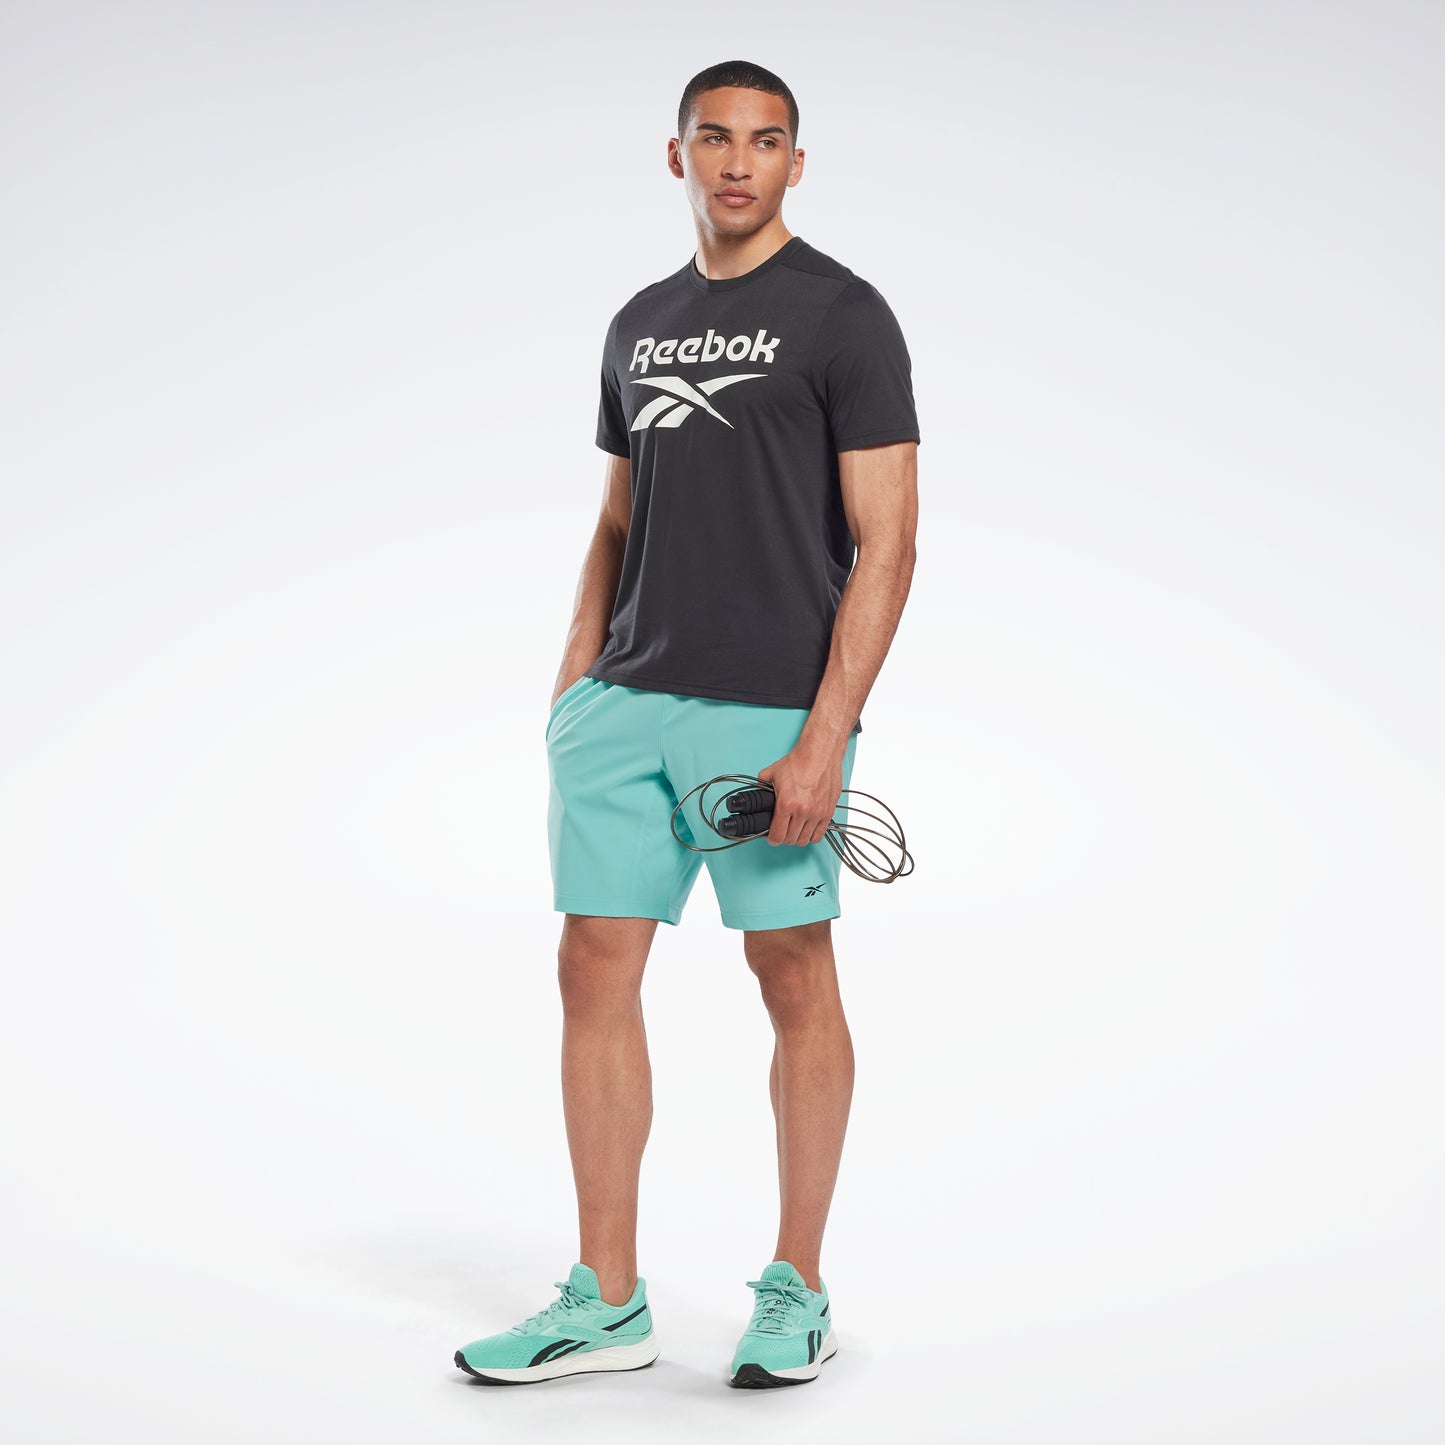 4-Pack: Reebok Men's Two Toned Athletic Performance Dazzle Shorts With